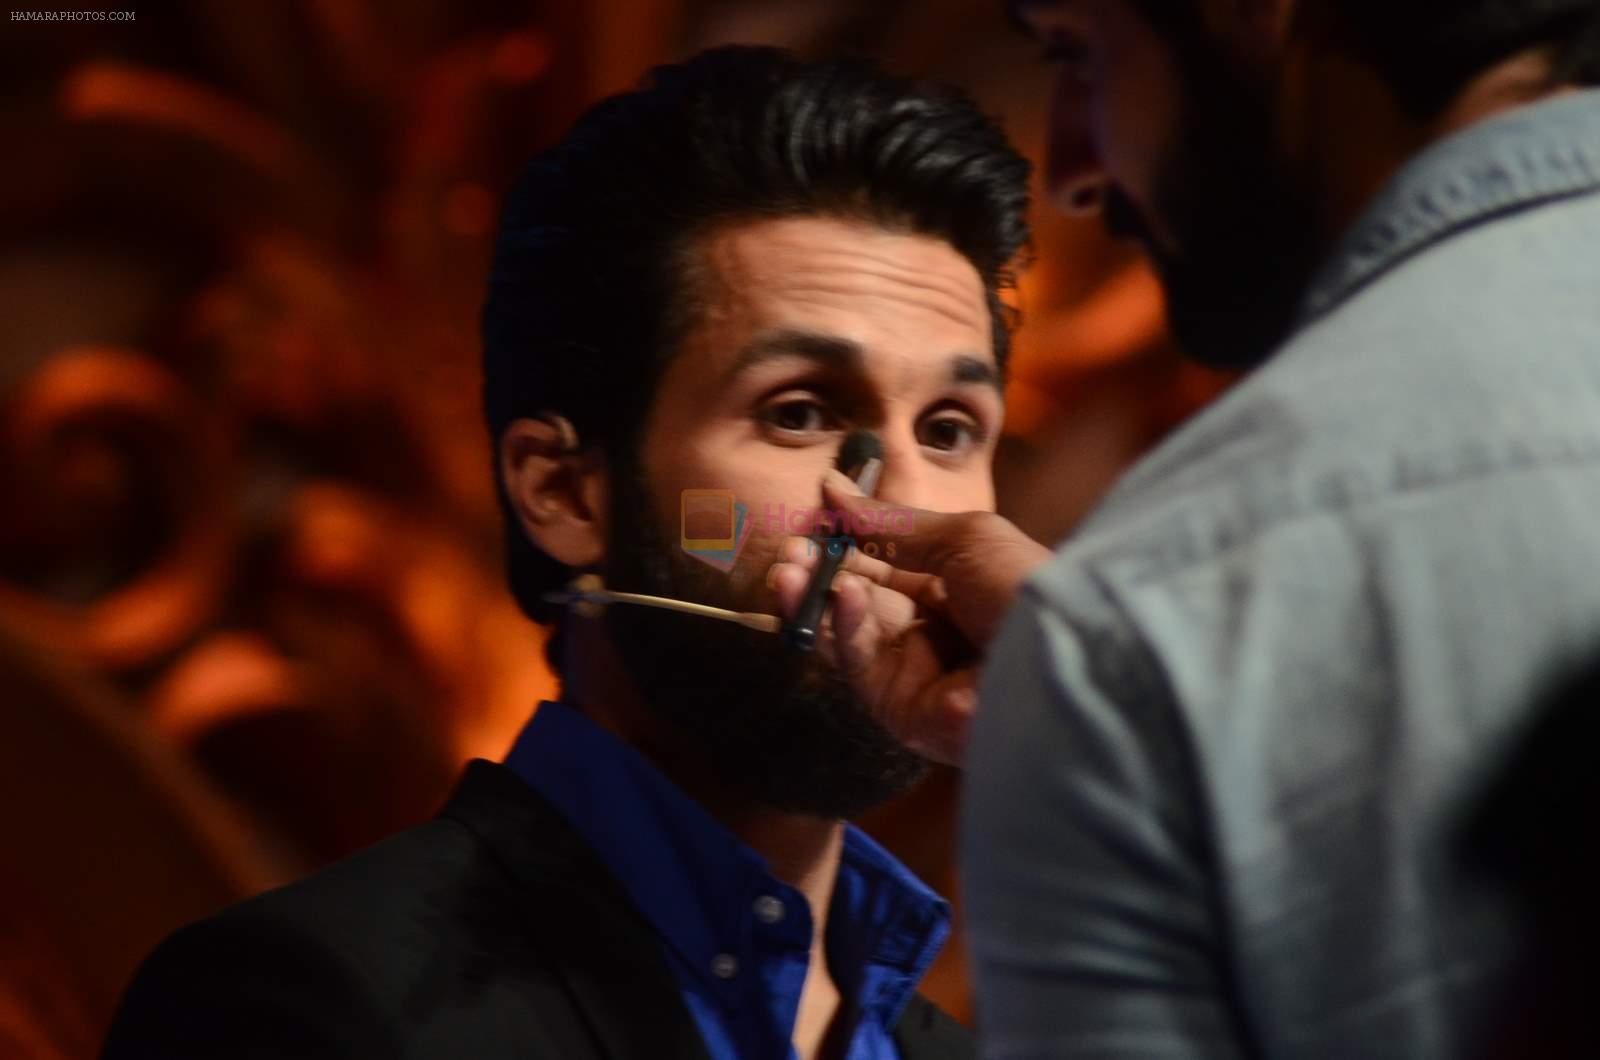 Shahid Kapoor  at Jhalak dikhhla jaa reloaded grand finale shoot in Filmistan on 7th Oct 2015